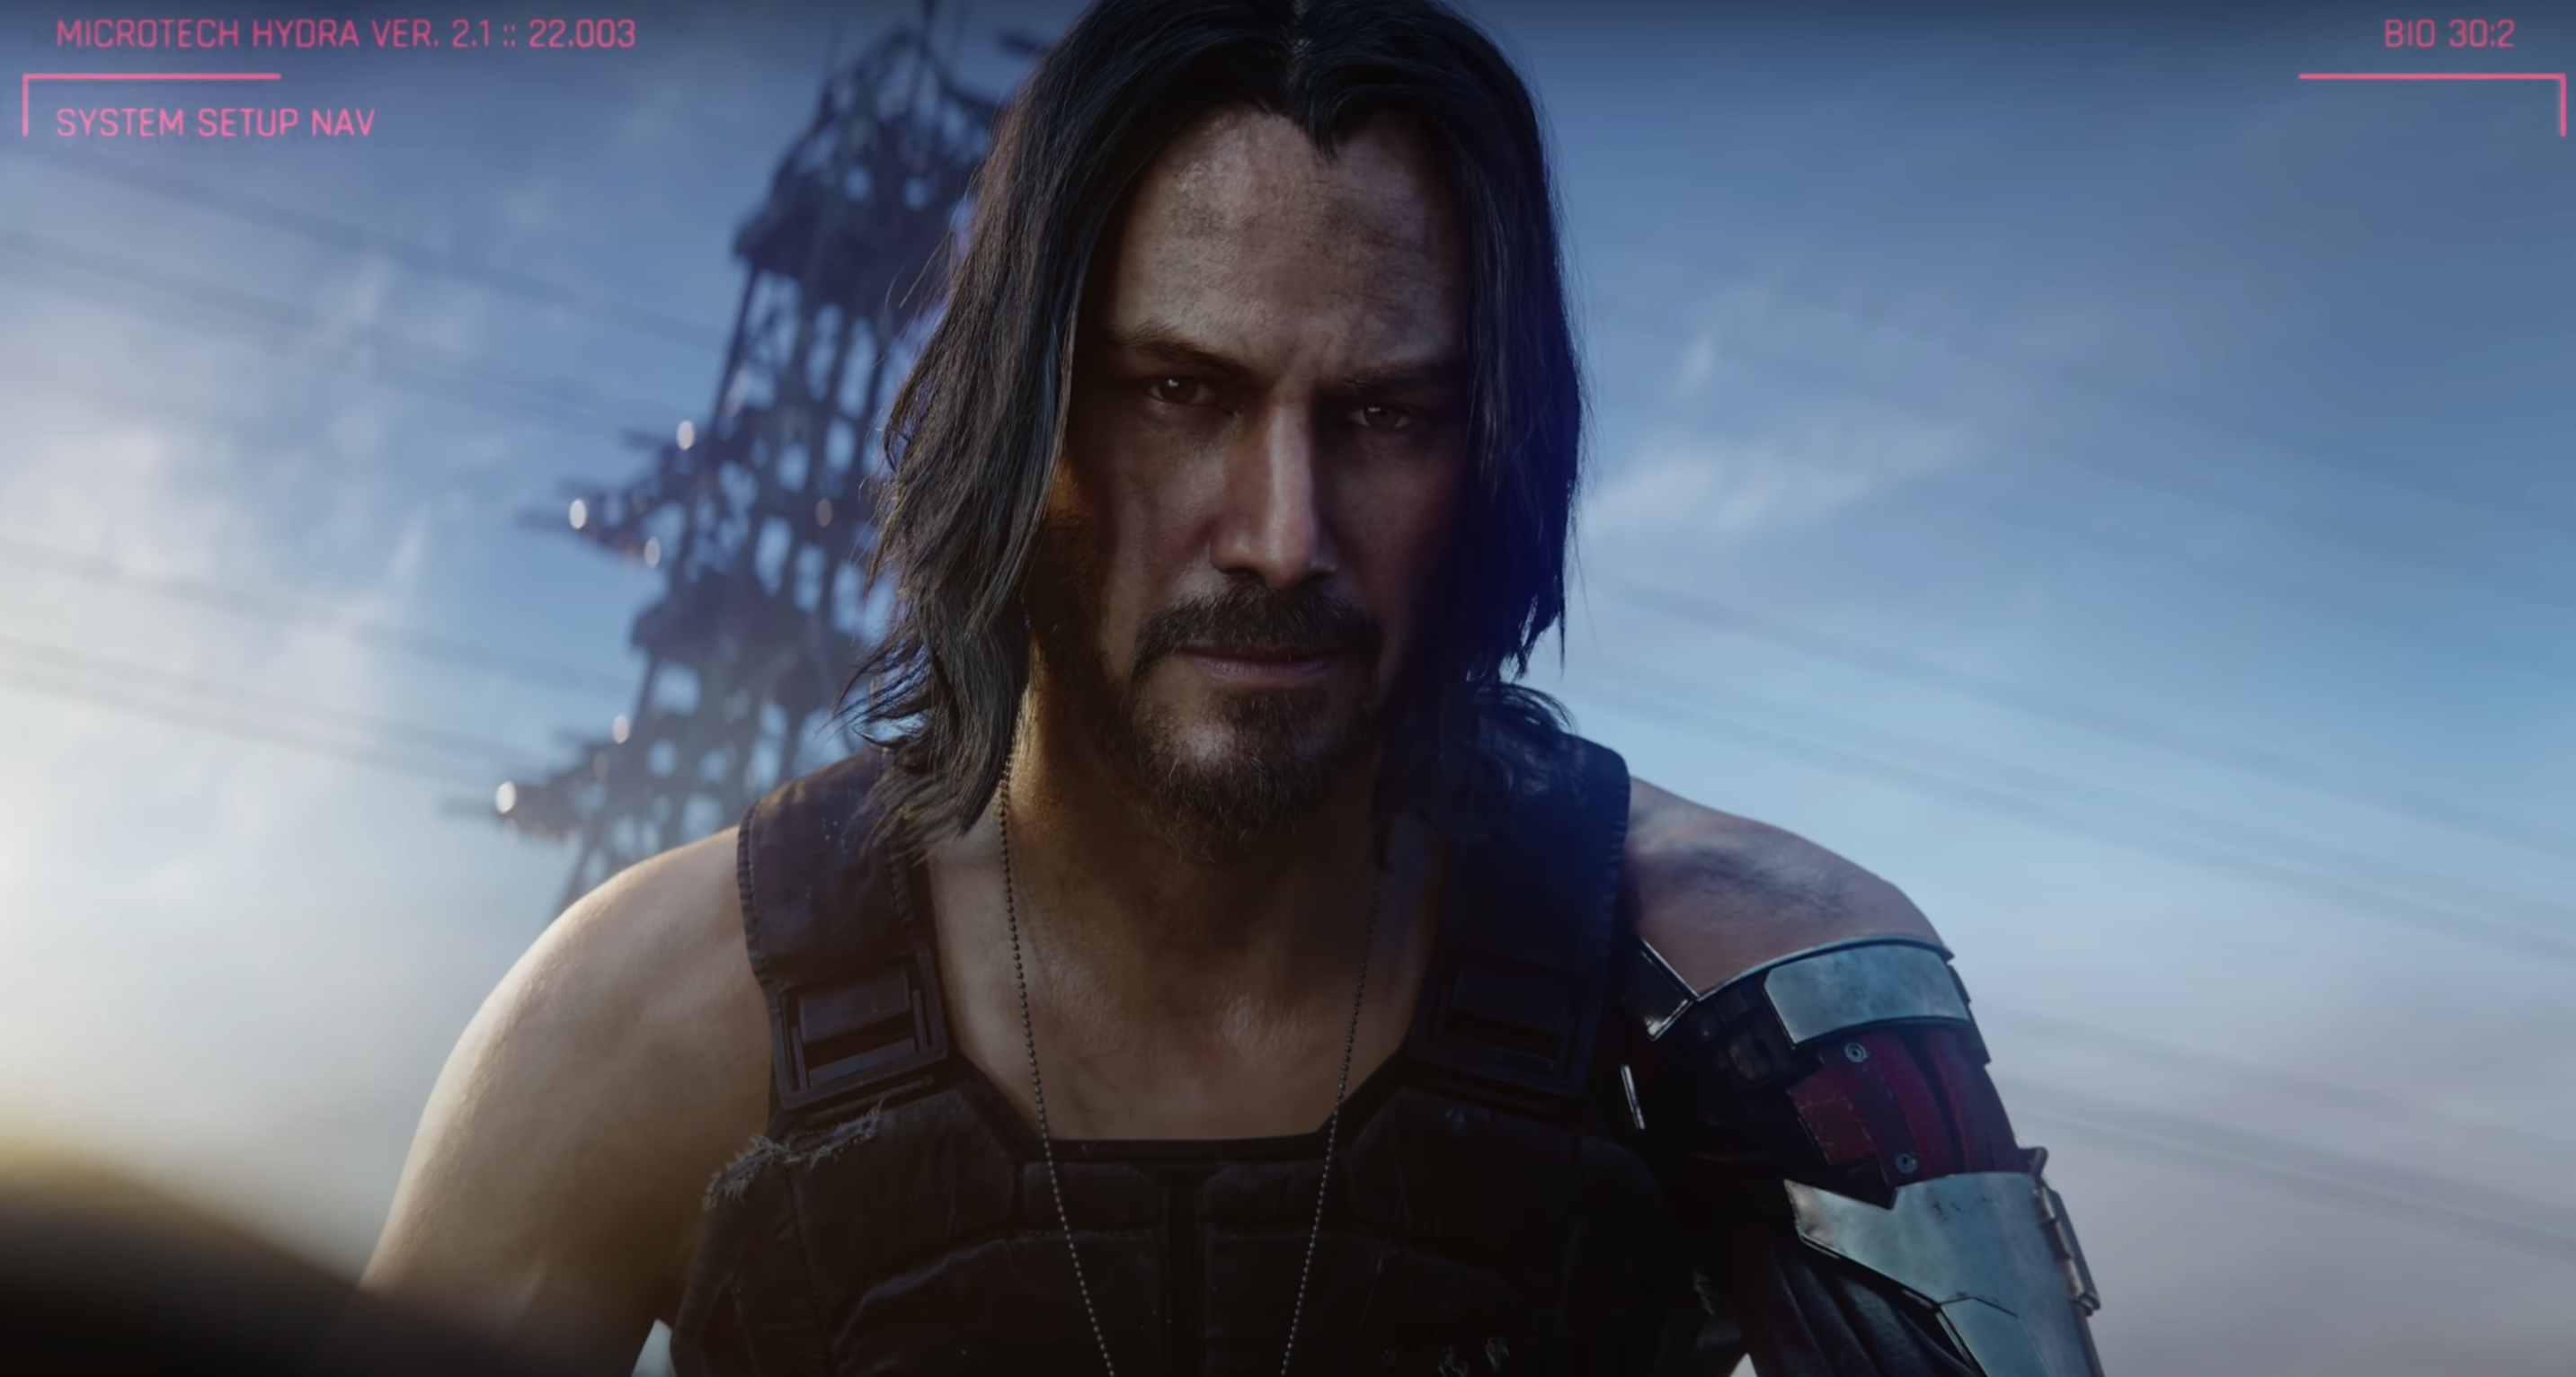 The daily gossip: The Cyberpunk 2077 release is not going well, Eminem  apologizes to Rihanna, and more